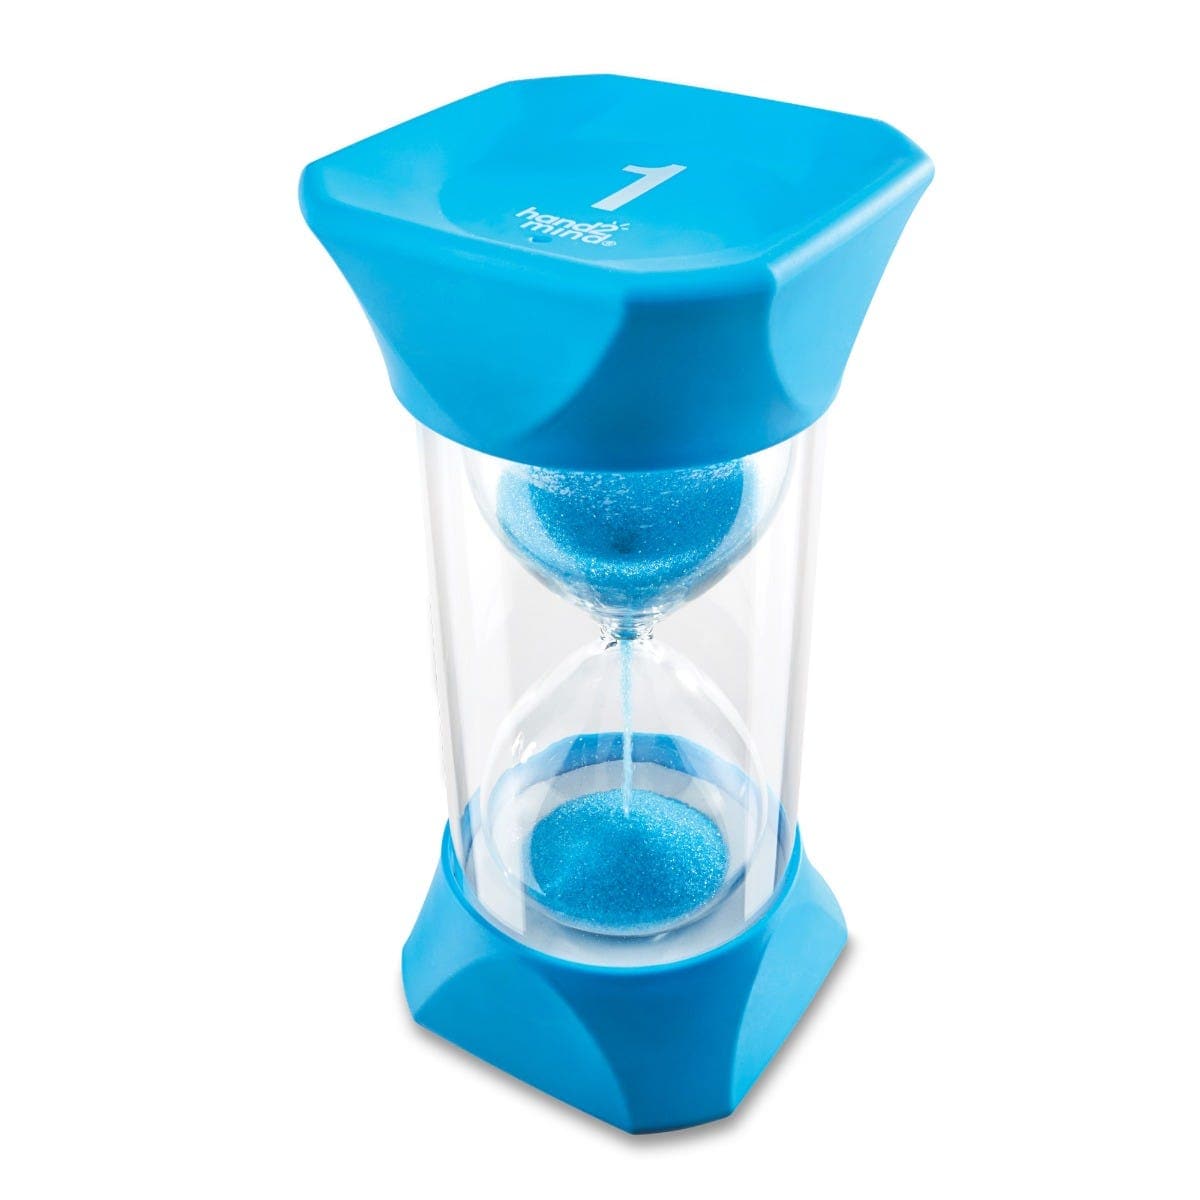 Jumbo Sand Timer (1-Minute), The Jumbo Sand Timer (1-Minute) is a versatile and educational tool that offers both teachers and parents an effective way to manage time and help children understand the concept of time passing. Its jumbo size, combined with the vibrant blue sand particles, makes it visually engaging for children. Jumbo Sand Timer (1-Minute) Features: Visual Aid: The large sand particles in a vivid blue colour provide a compelling, visual representation of approximately one minute passing, help